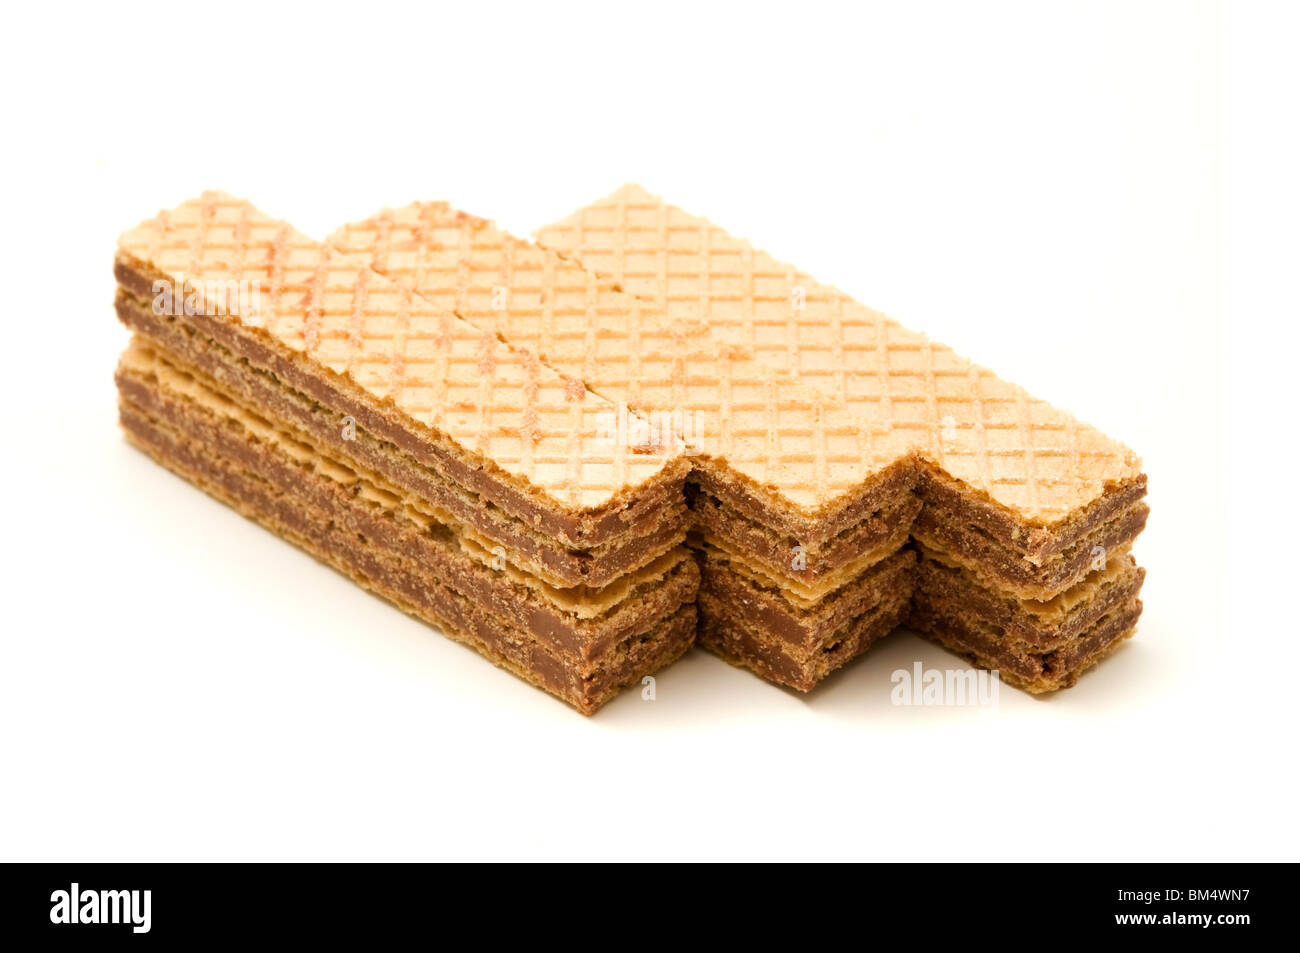 Wafers on a white background Stock Photo